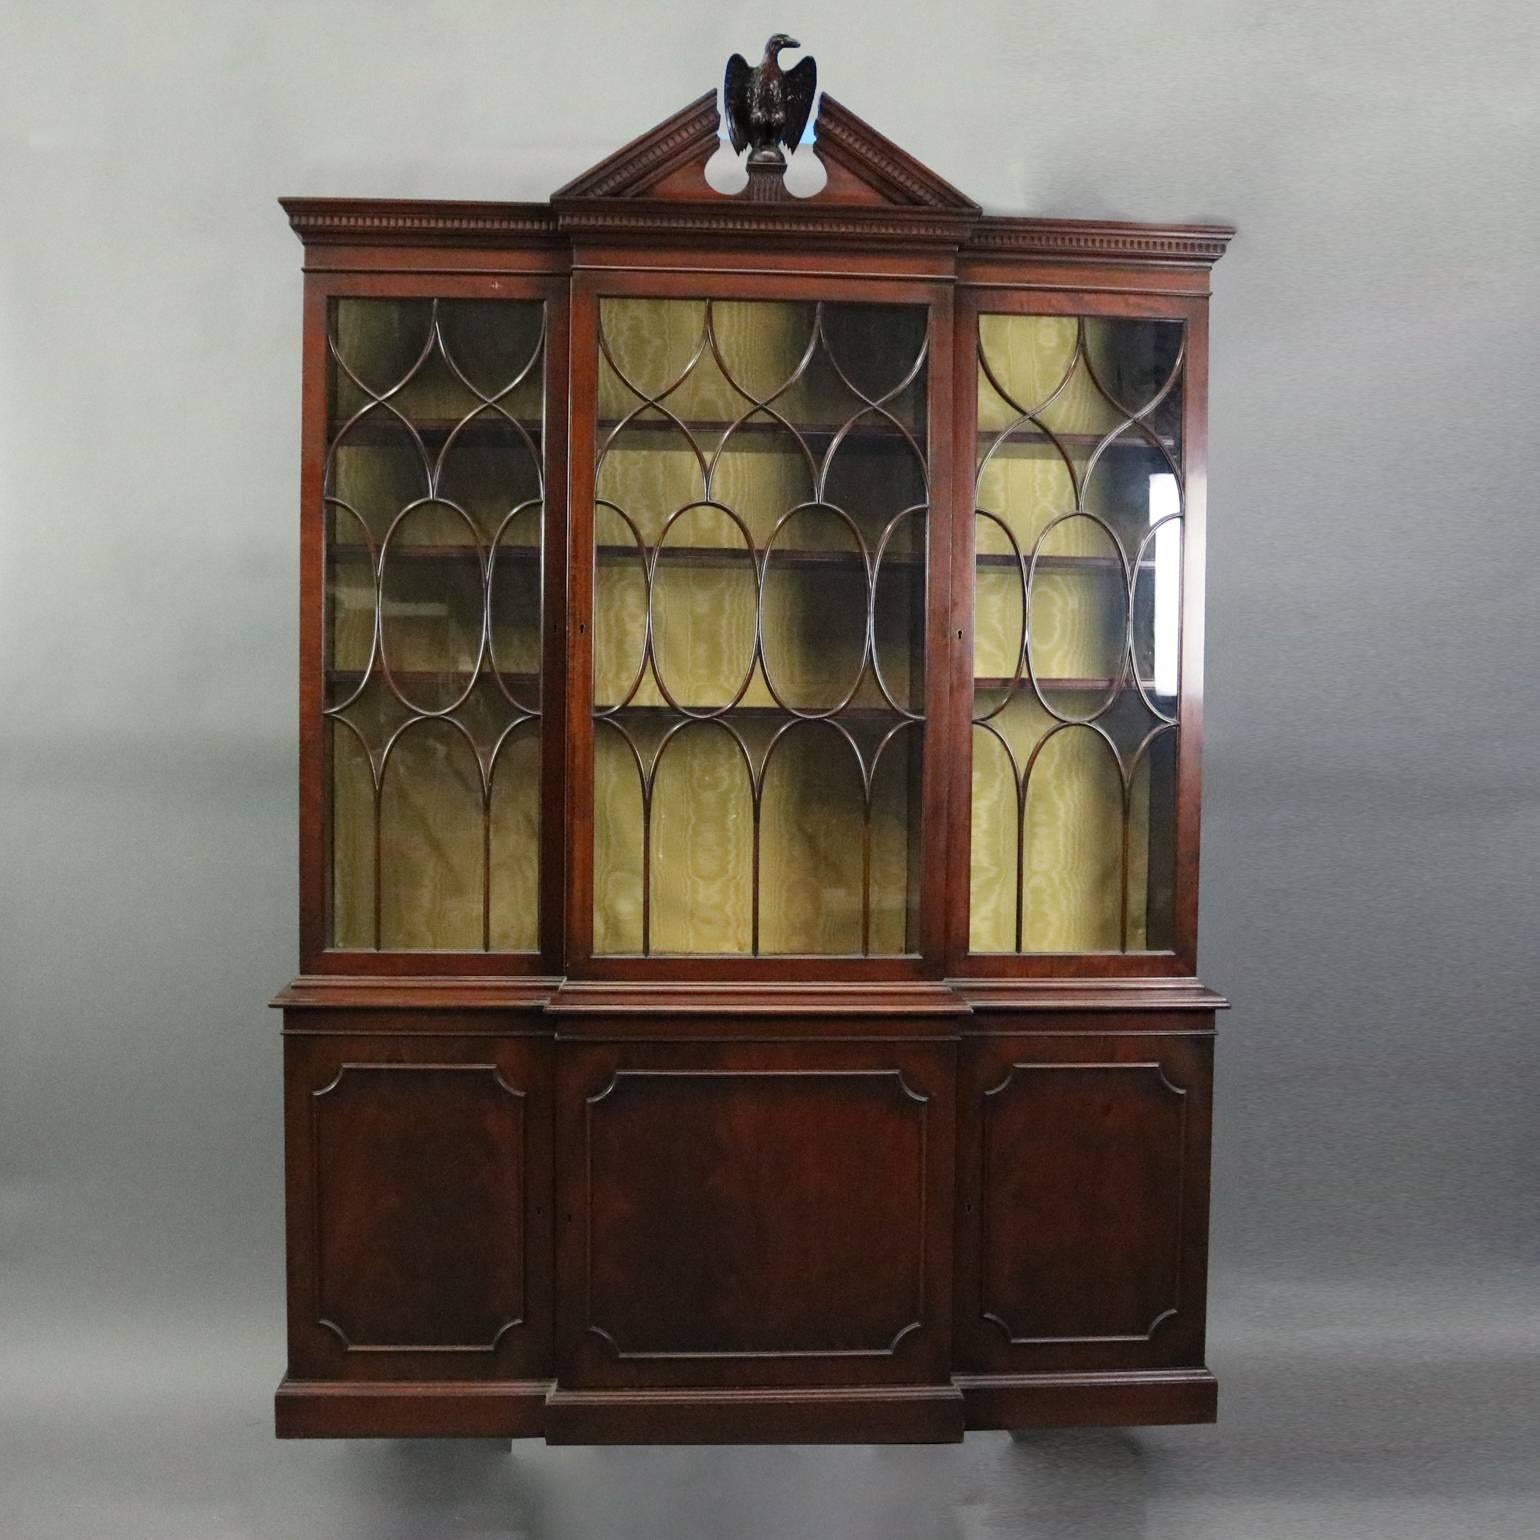 Antique Federal style two-piece breakfront china cabinet features mahogany construction with glass front doors opening to interior display, broken arch pediment with central carved eagle, includes two keys, en verso label reads "This piece was